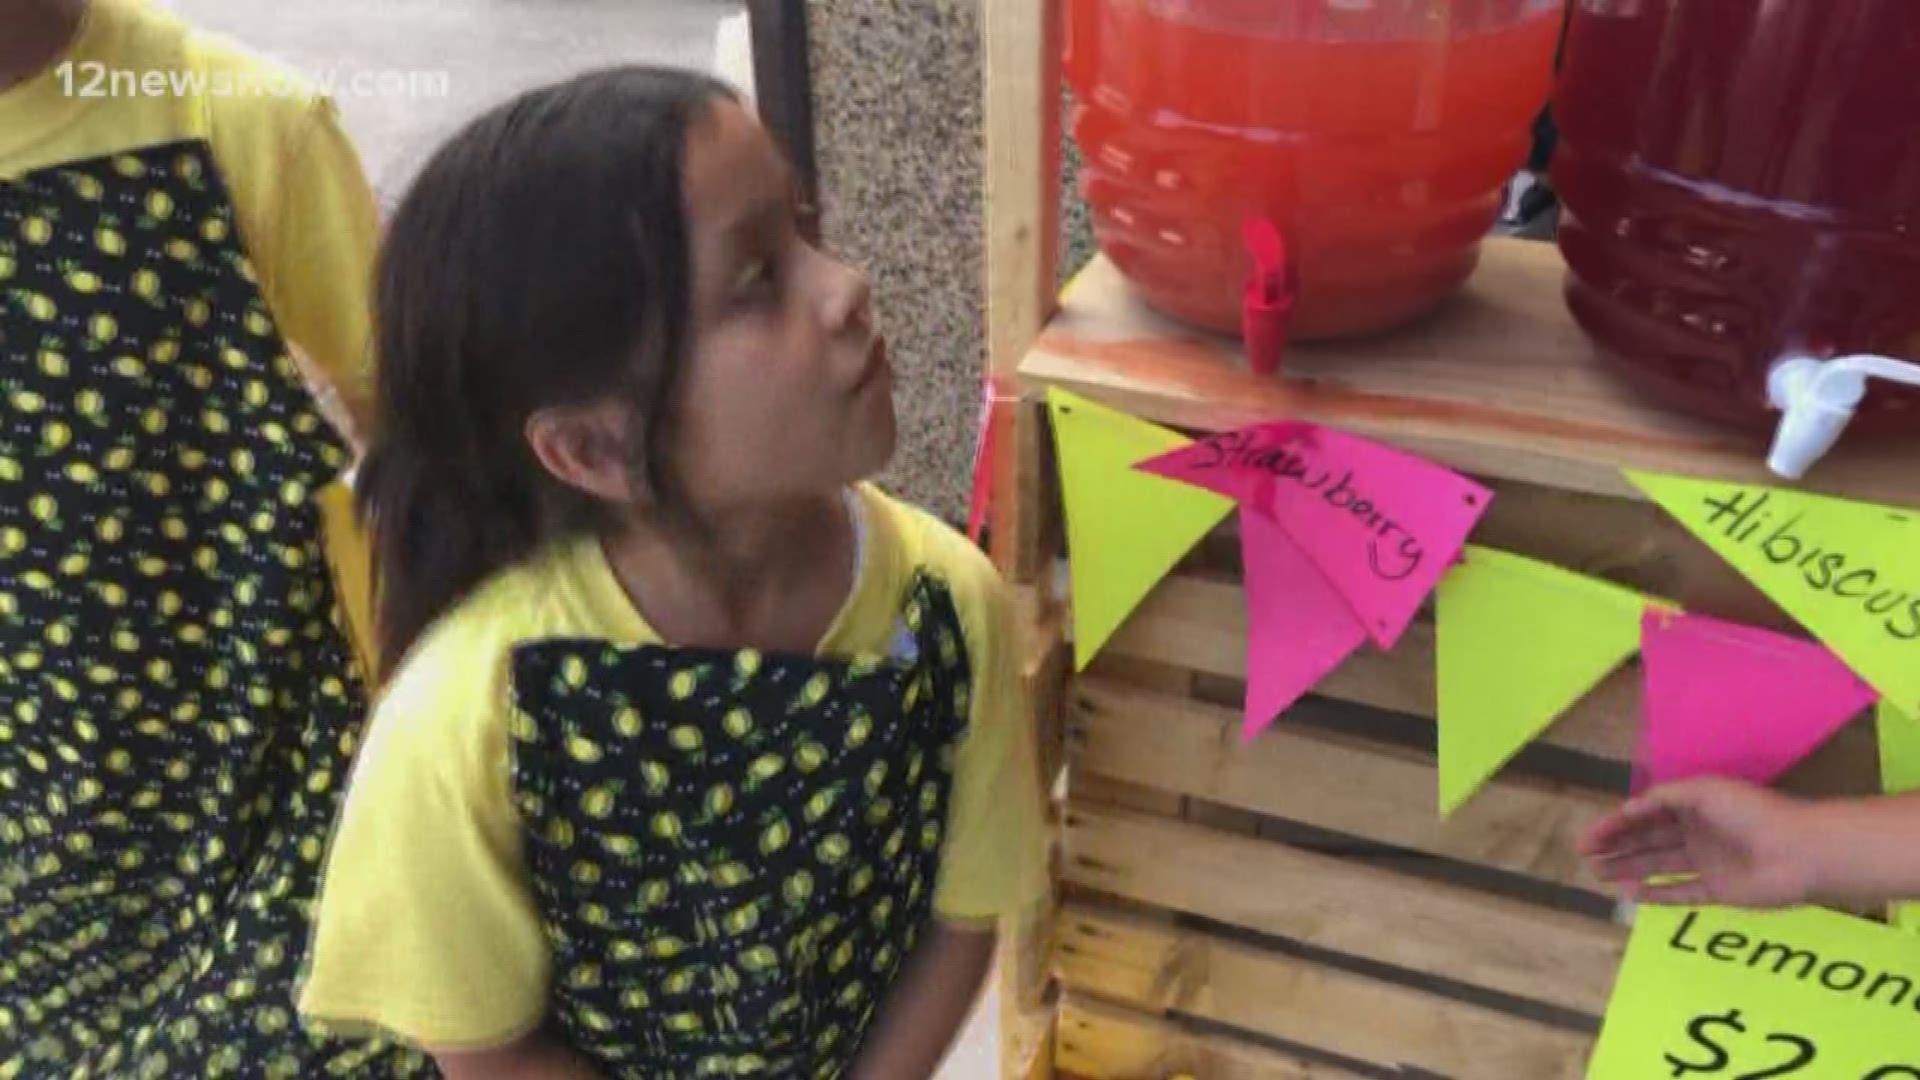 Around 40 different lemonade stands were registered for the 2019 event.